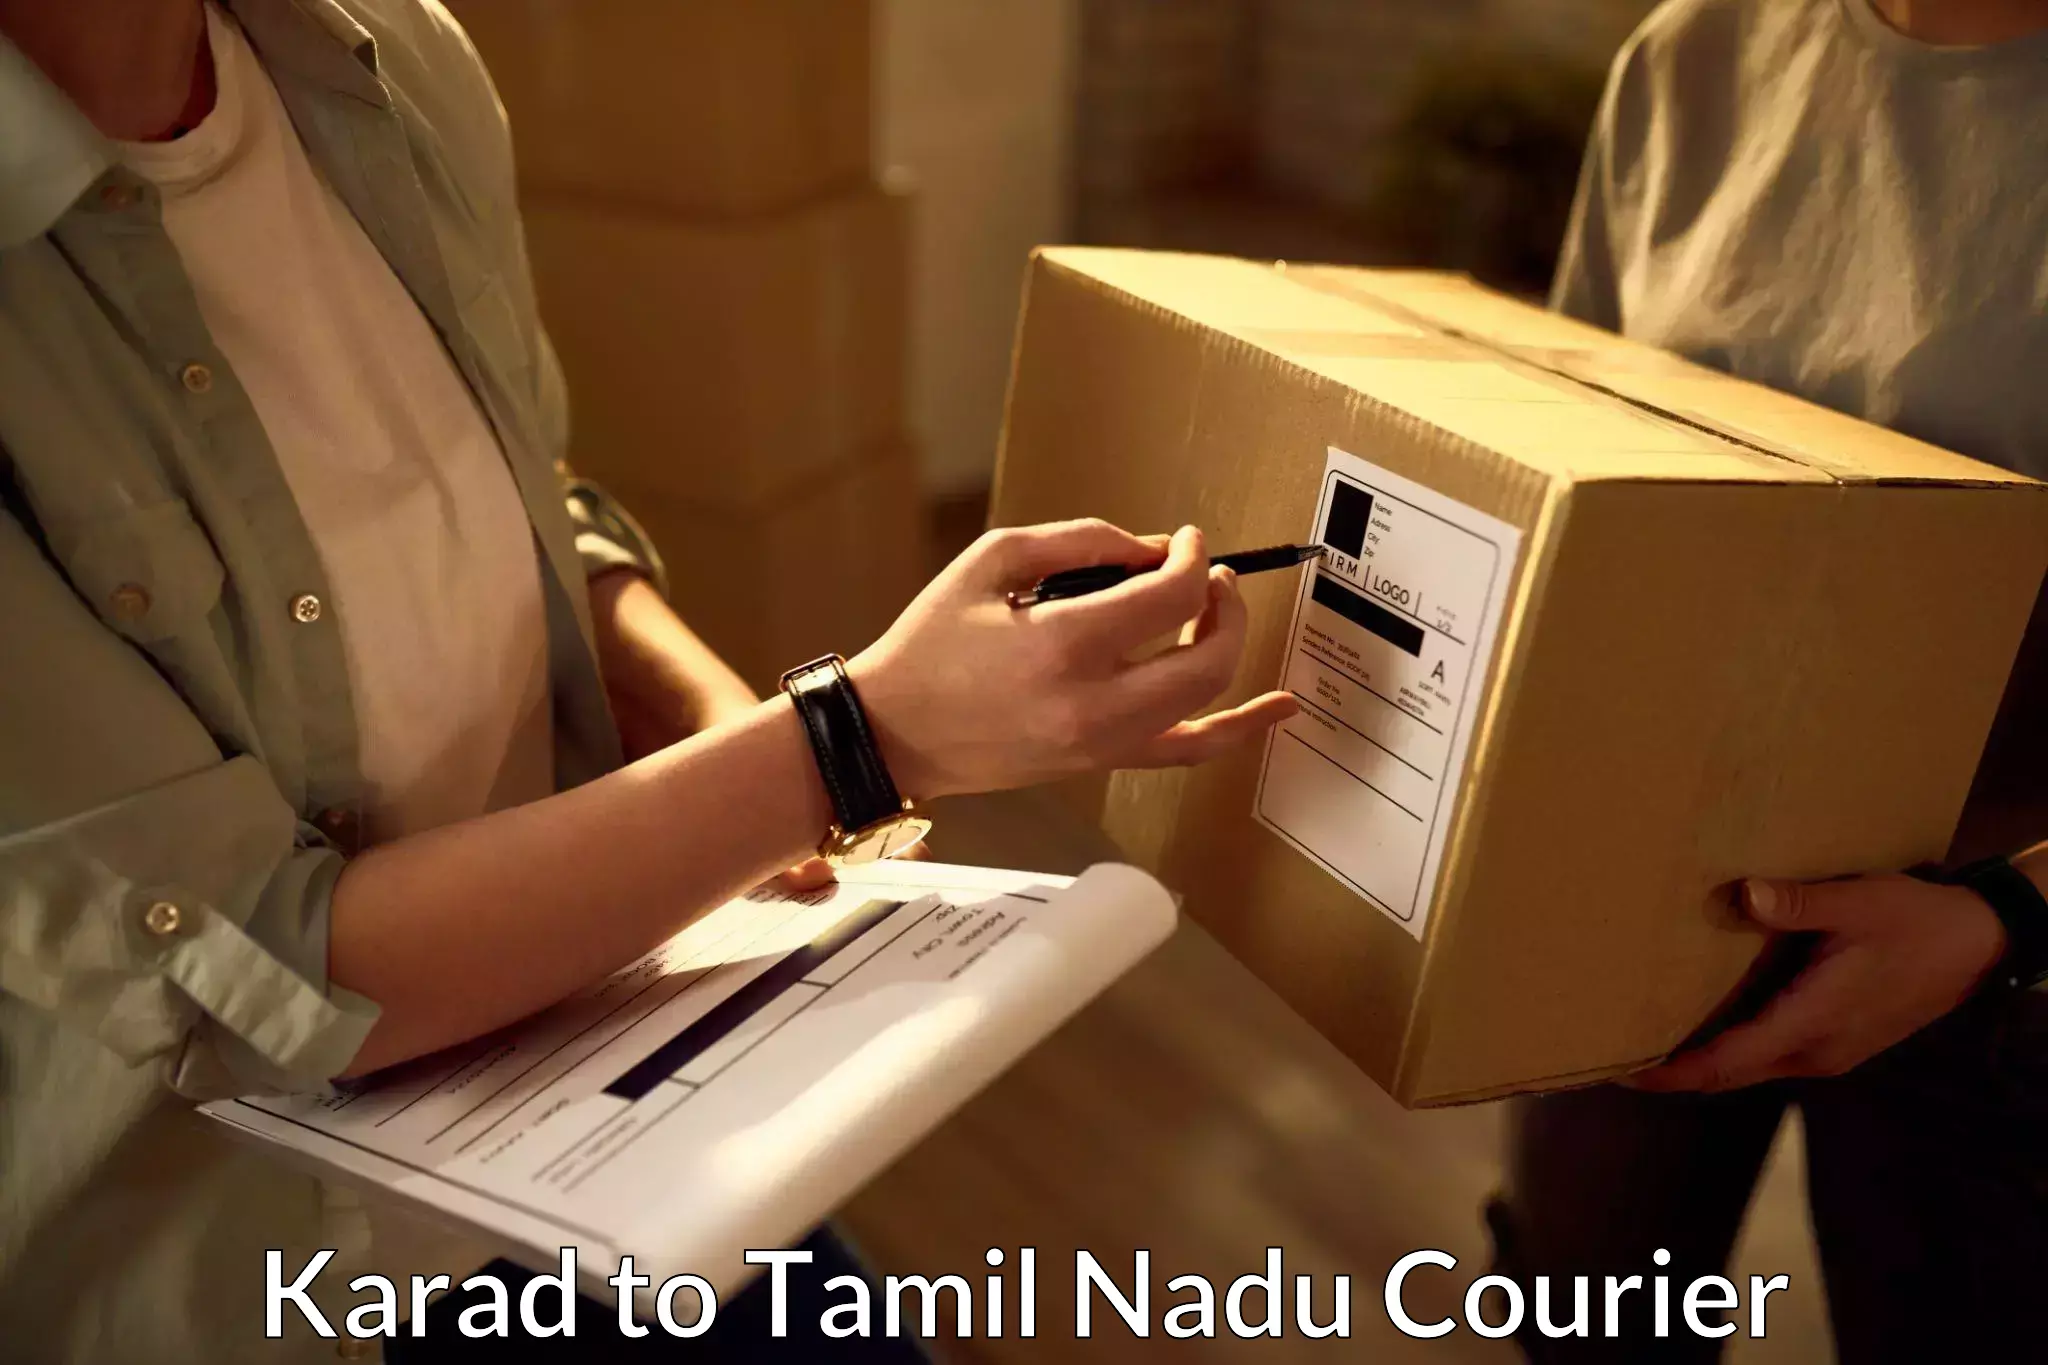 Courier rate comparison Karad to Sri Ramachandra Institute of Higher Education and Research Chennai